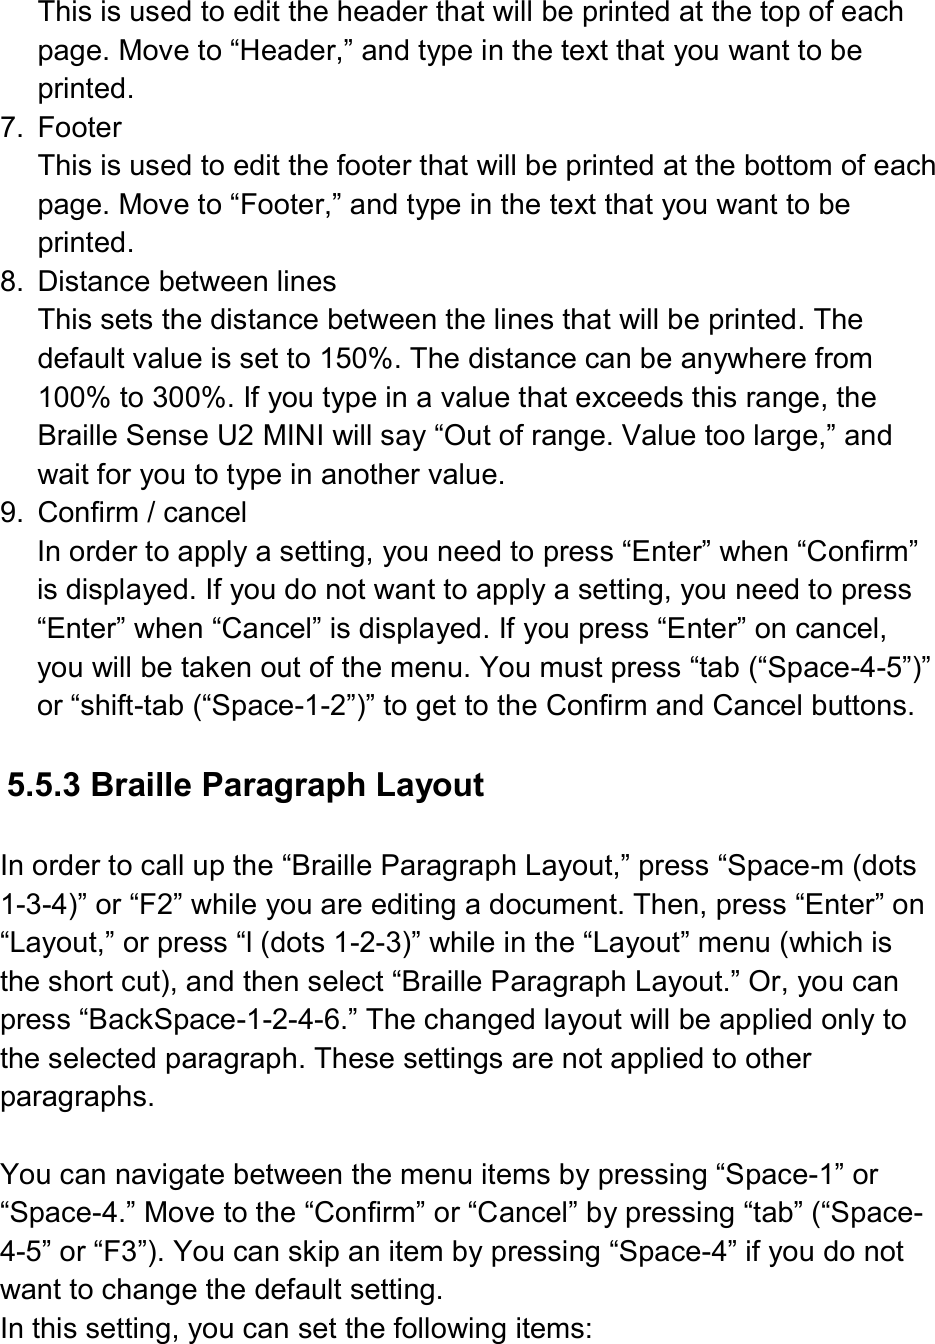  This is used to edit the header that will be printed at the top of each page. Move to “Header,” and type in the text that you want to be printed. 7.  Footer This is used to edit the footer that will be printed at the bottom of each page. Move to “Footer,” and type in the text that you want to be printed. 8.  Distance between lines This sets the distance between the lines that will be printed. The default value is set to 150%. The distance can be anywhere from 100% to 300%. If you type in a value that exceeds this range, the Braille Sense U2 MINI will say “Out of range. Value too large,” and wait for you to type in another value. 9.  Confirm / cancel In order to apply a setting, you need to press “Enter” when “Confirm” is displayed. If you do not want to apply a setting, you need to press “Enter” when “Cancel” is displayed. If you press “Enter” on cancel, you will be taken out of the menu. You must press “tab (“Space-4-5”)” or “shift-tab (“Space-1-2”)” to get to the Confirm and Cancel buttons.  5.5.3 Braille Paragraph Layout    In order to call up the “Braille Paragraph Layout,” press “Space-m (dots 1-3-4)” or “F2” while you are editing a document. Then, press “Enter” on “Layout,” or press “l (dots 1-2-3)” while in the “Layout” menu (which is the short cut), and then select “Braille Paragraph Layout.” Or, you can press “BackSpace-1-2-4-6.” The changed layout will be applied only to the selected paragraph. These settings are not applied to other paragraphs.  You can navigate between the menu items by pressing “Space-1” or “Space-4.” Move to the “Confirm” or “Cancel” by pressing “tab” (“Space-4-5” or “F3”). You can skip an item by pressing “Space-4” if you do not want to change the default setting. In this setting, you can set the following items:    